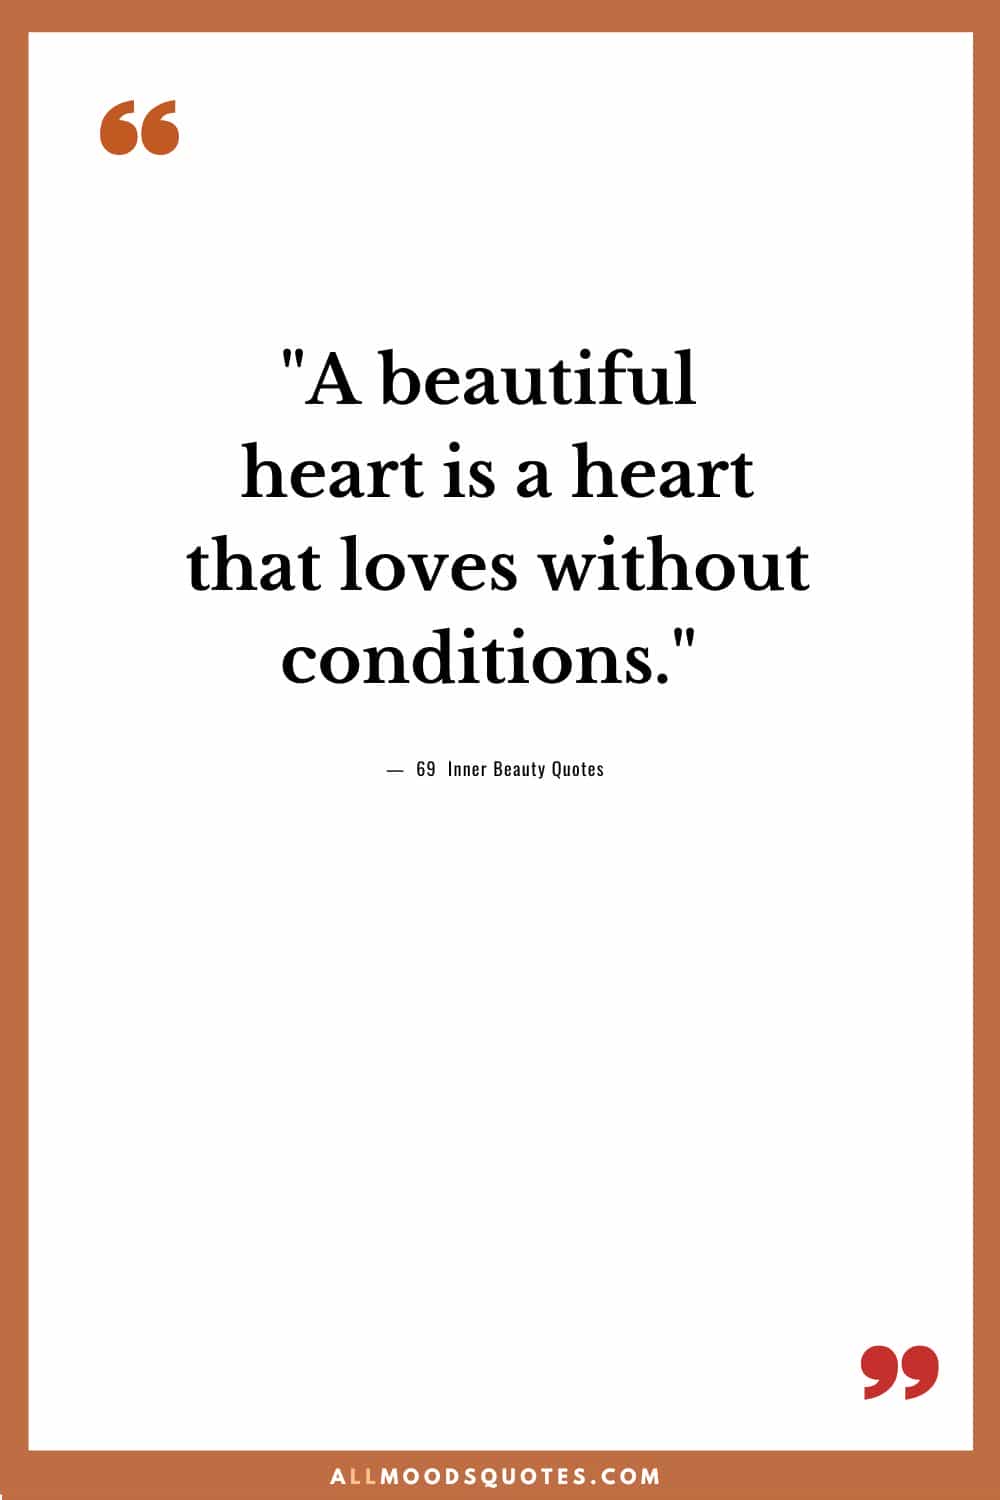 A beautiful heart is a heart that loves without conditions.